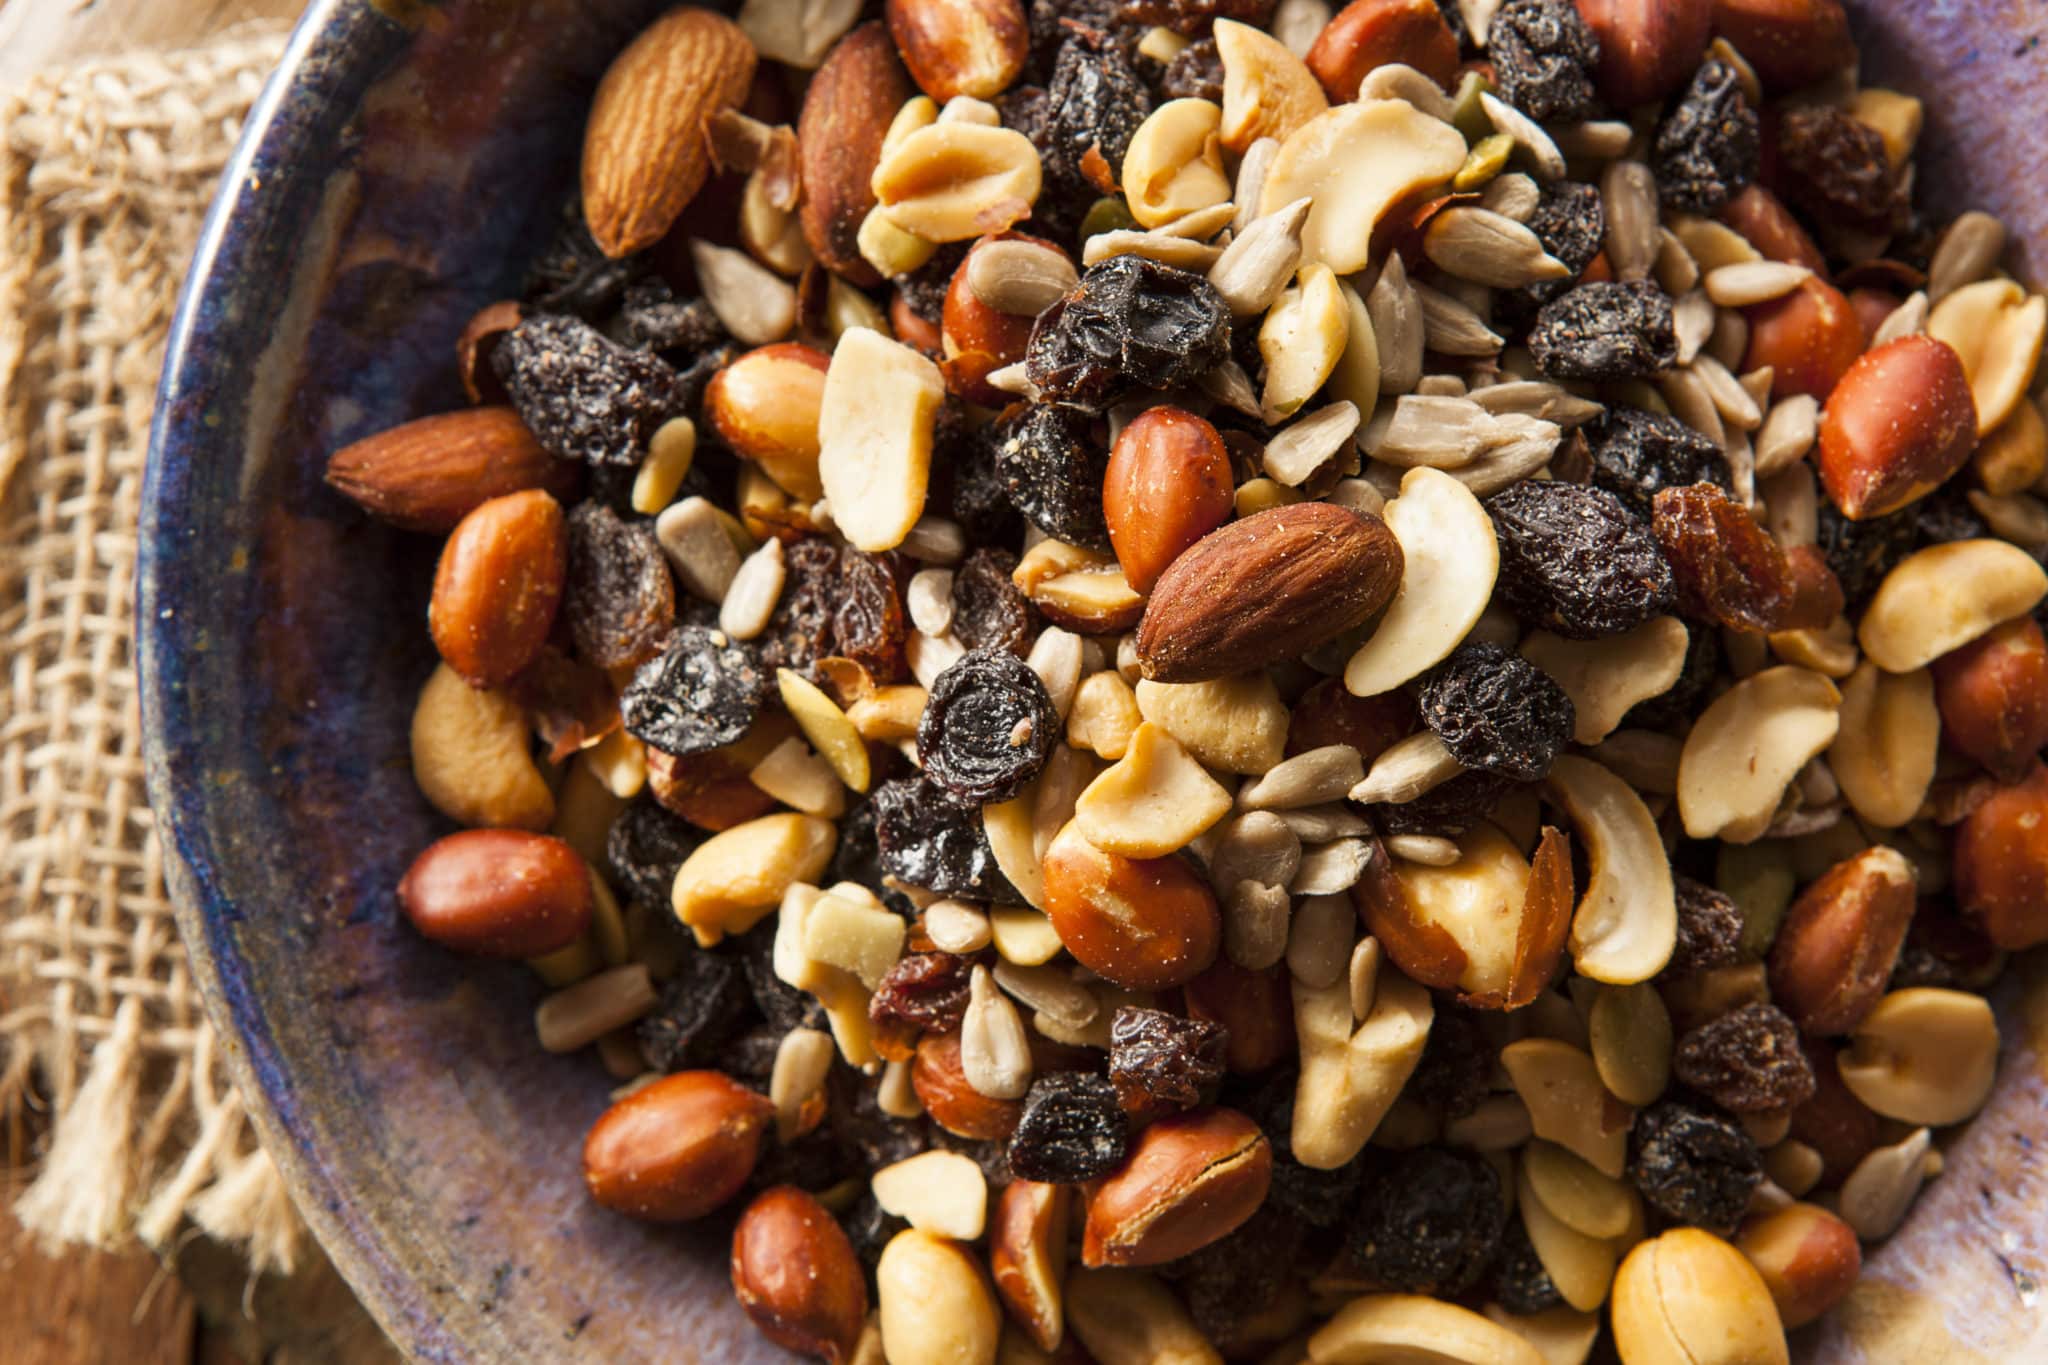 Try these 17 healthy and portable snacks next time you feel the munchies coming on!